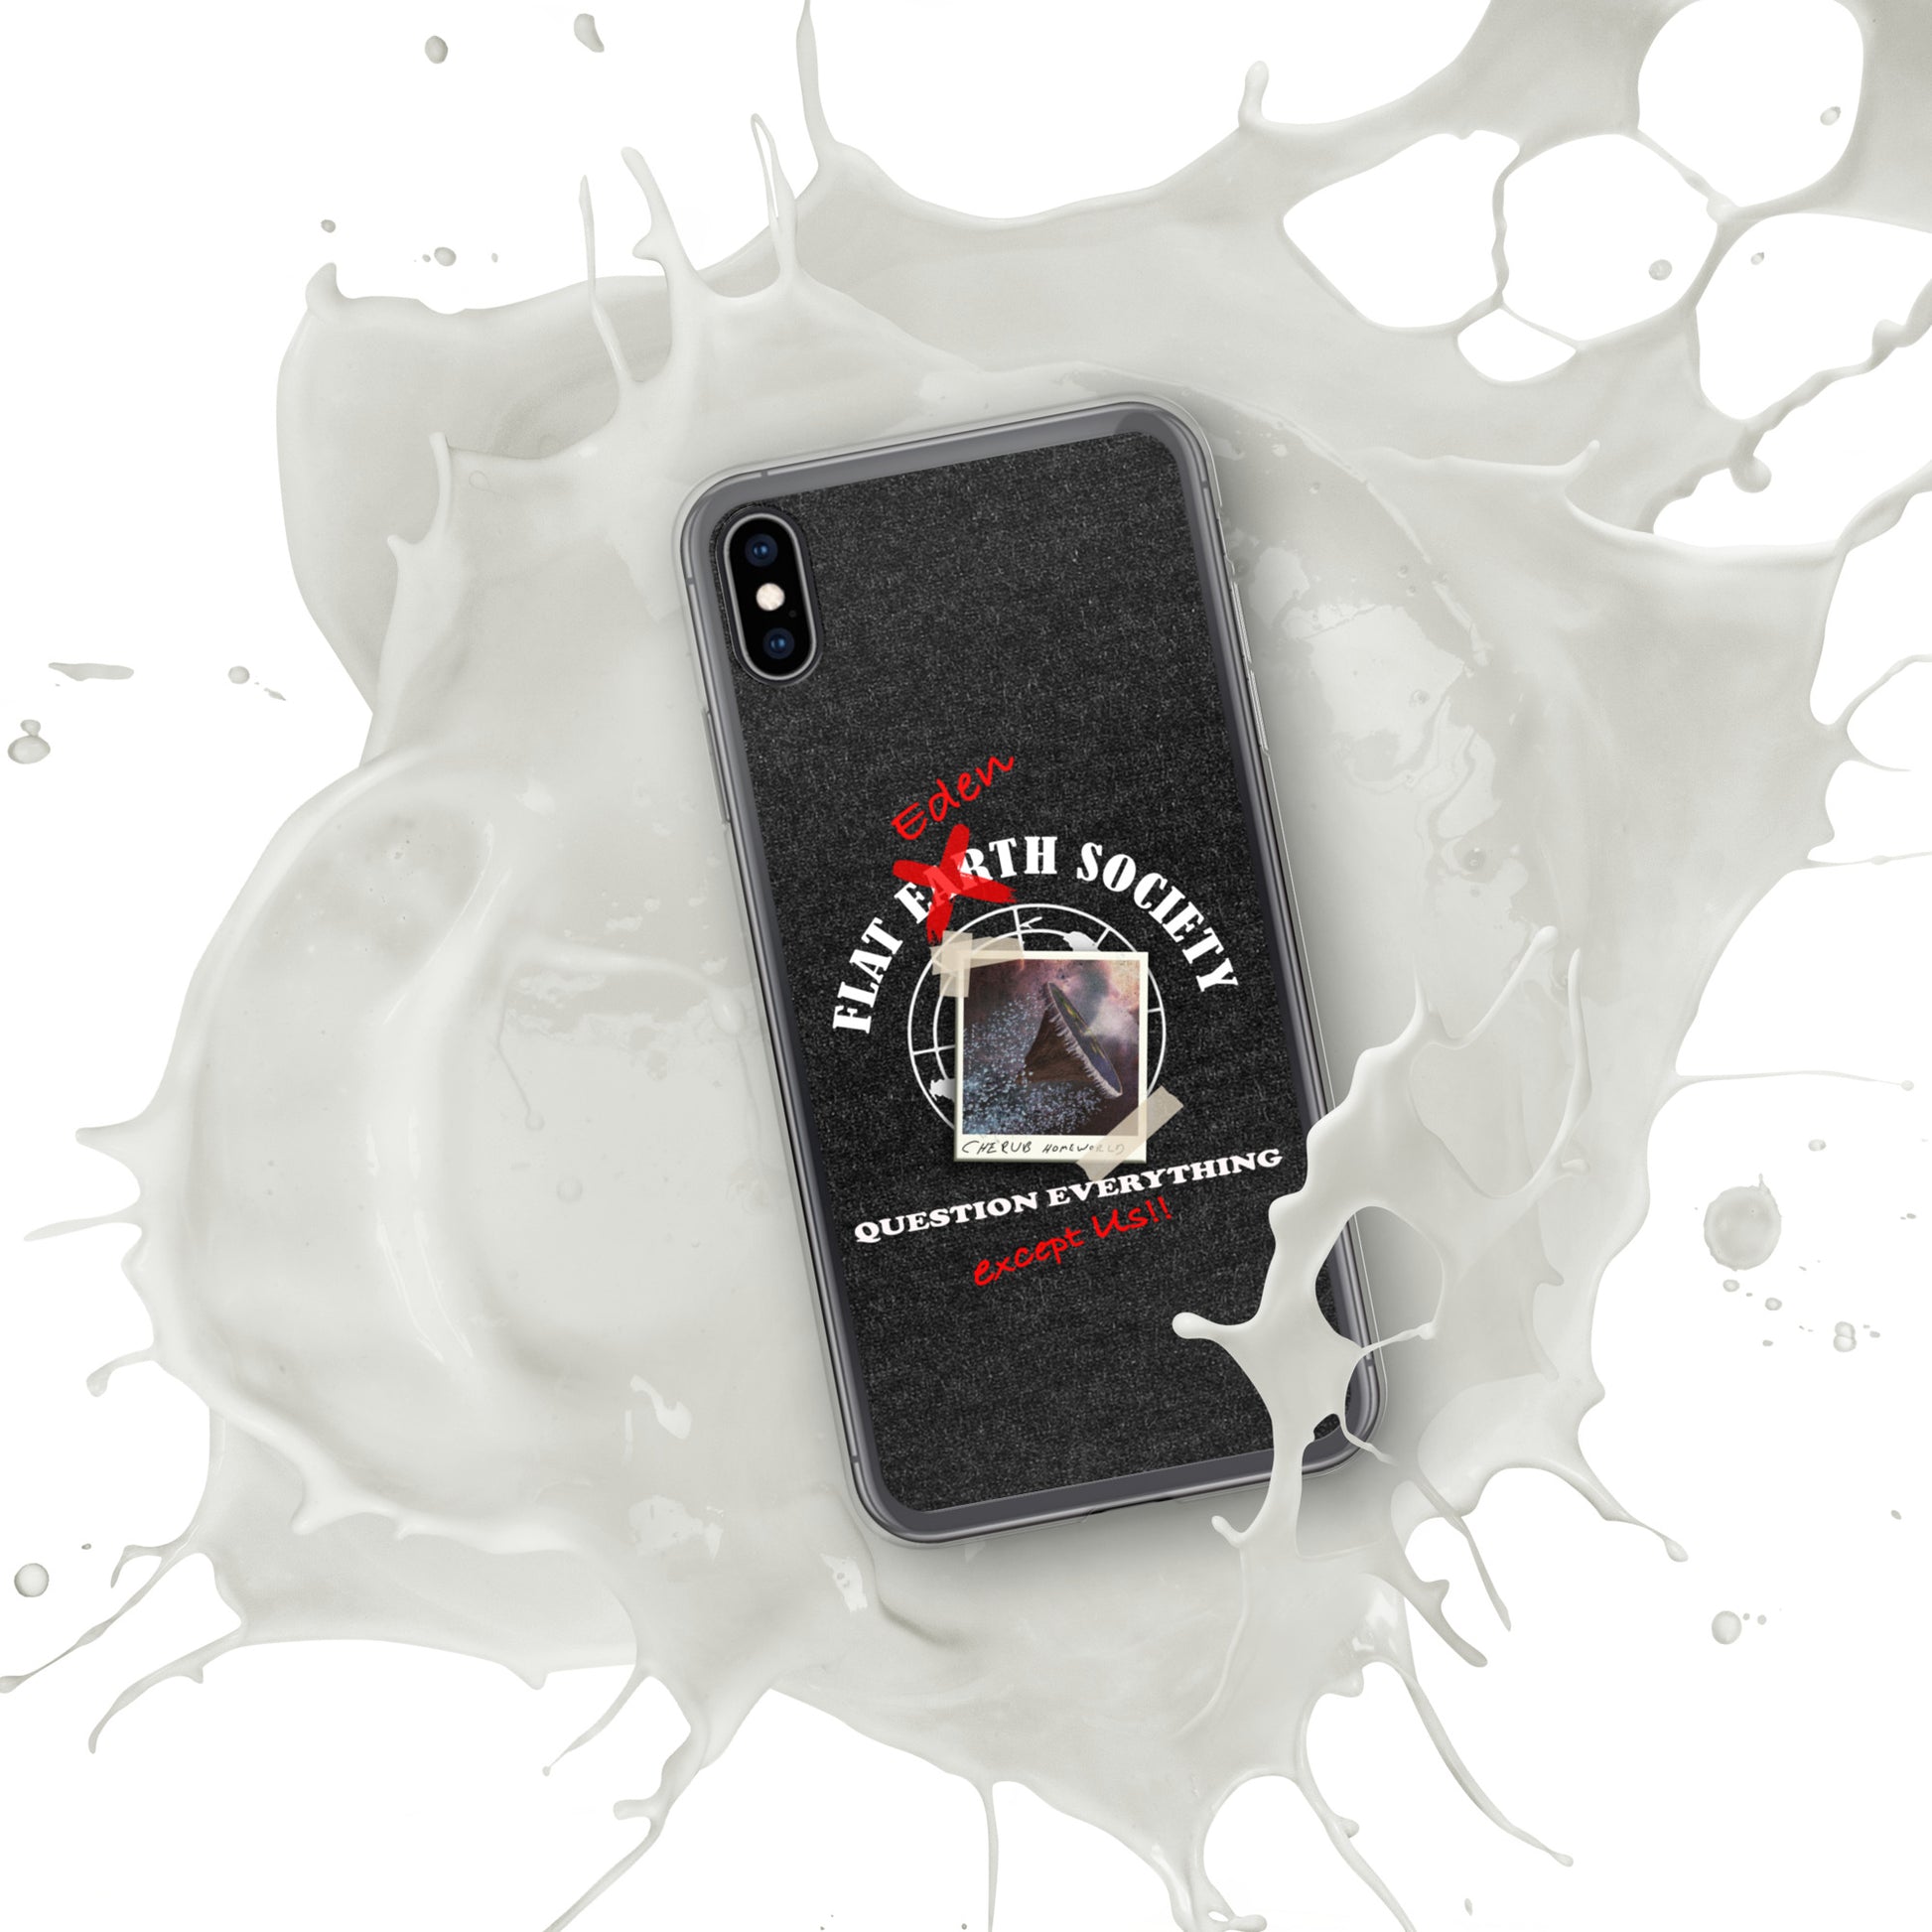 iPhone Case | Intergalactic Space Force 2 | Flat Eden Society - Spectral Ink Shop - Mobile Phone Cases -9780728_9621